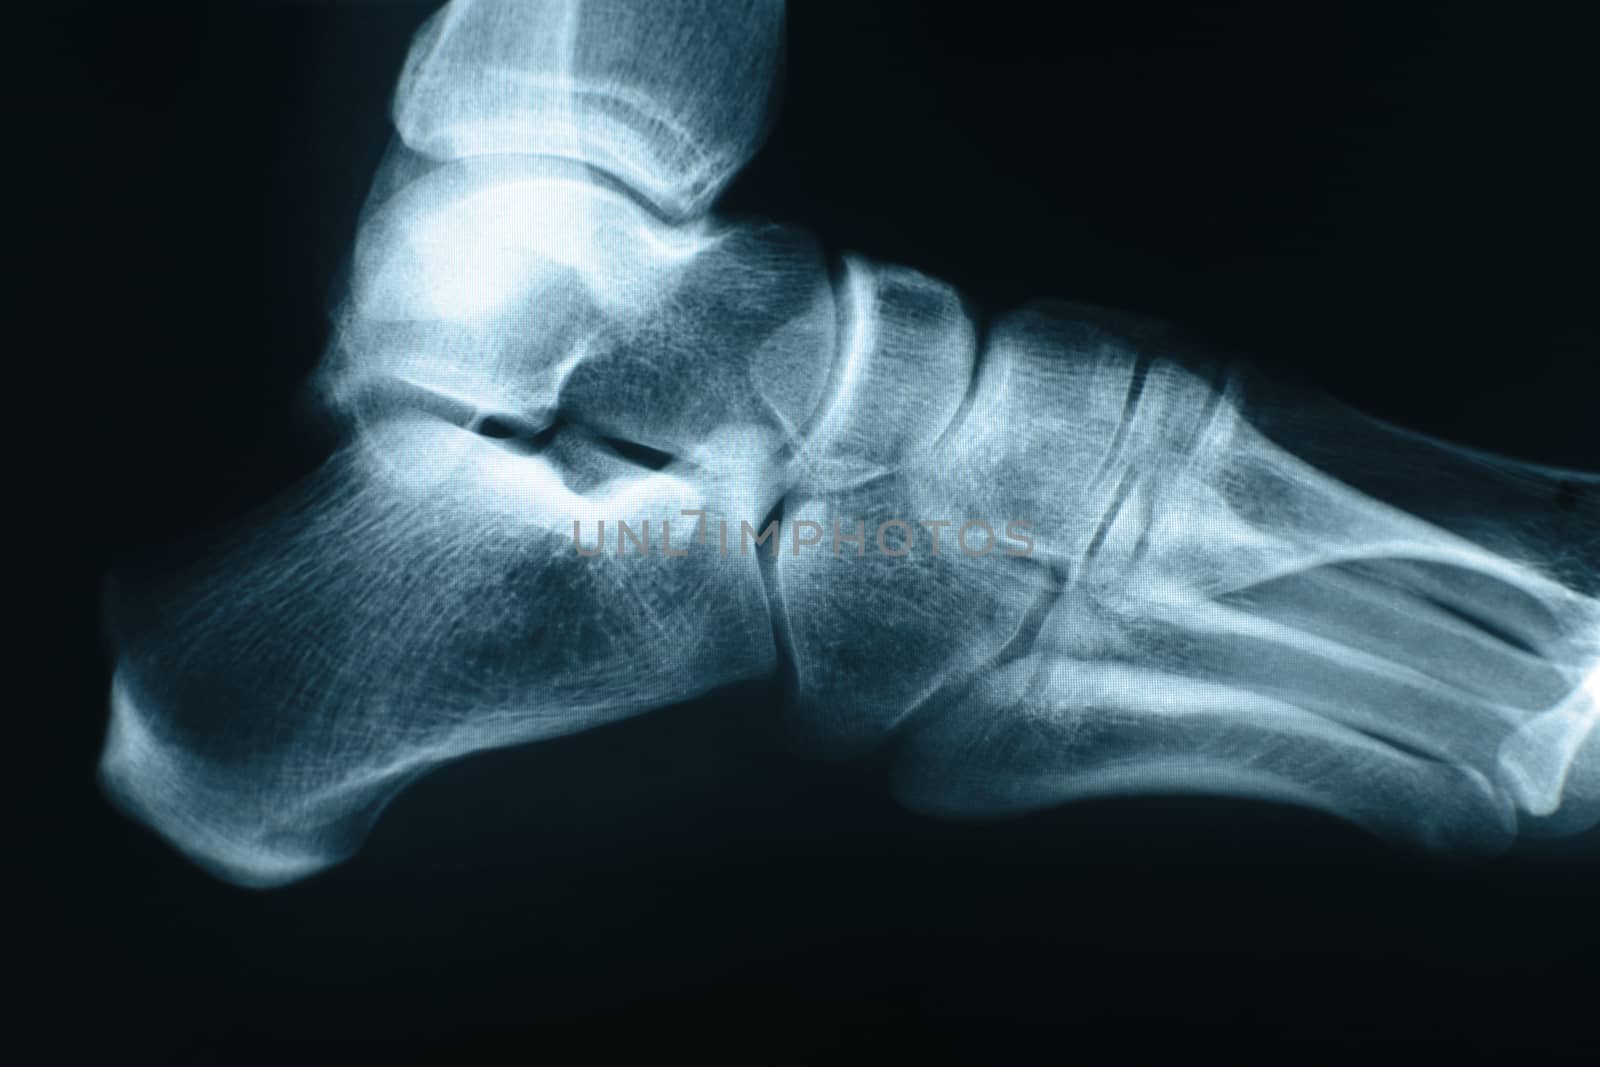 Xray shot of right foot made in a hospital.